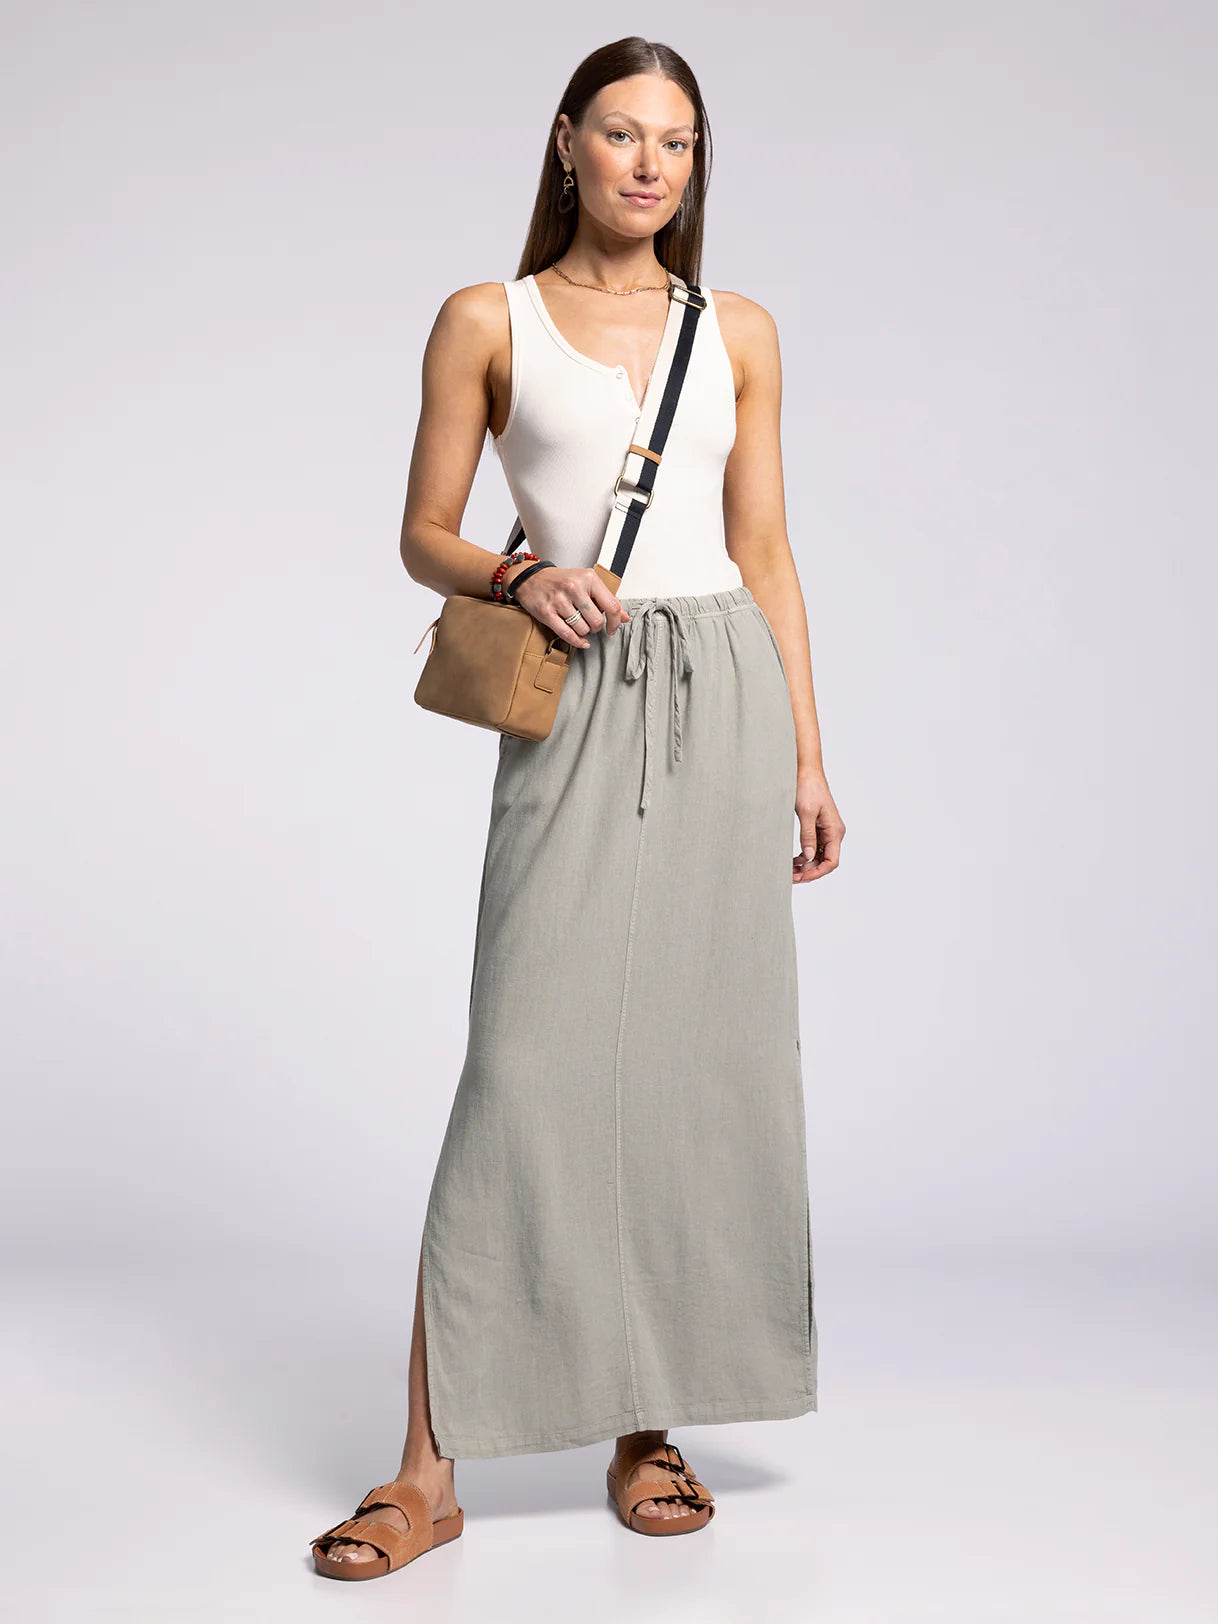 The Alcove Skirt